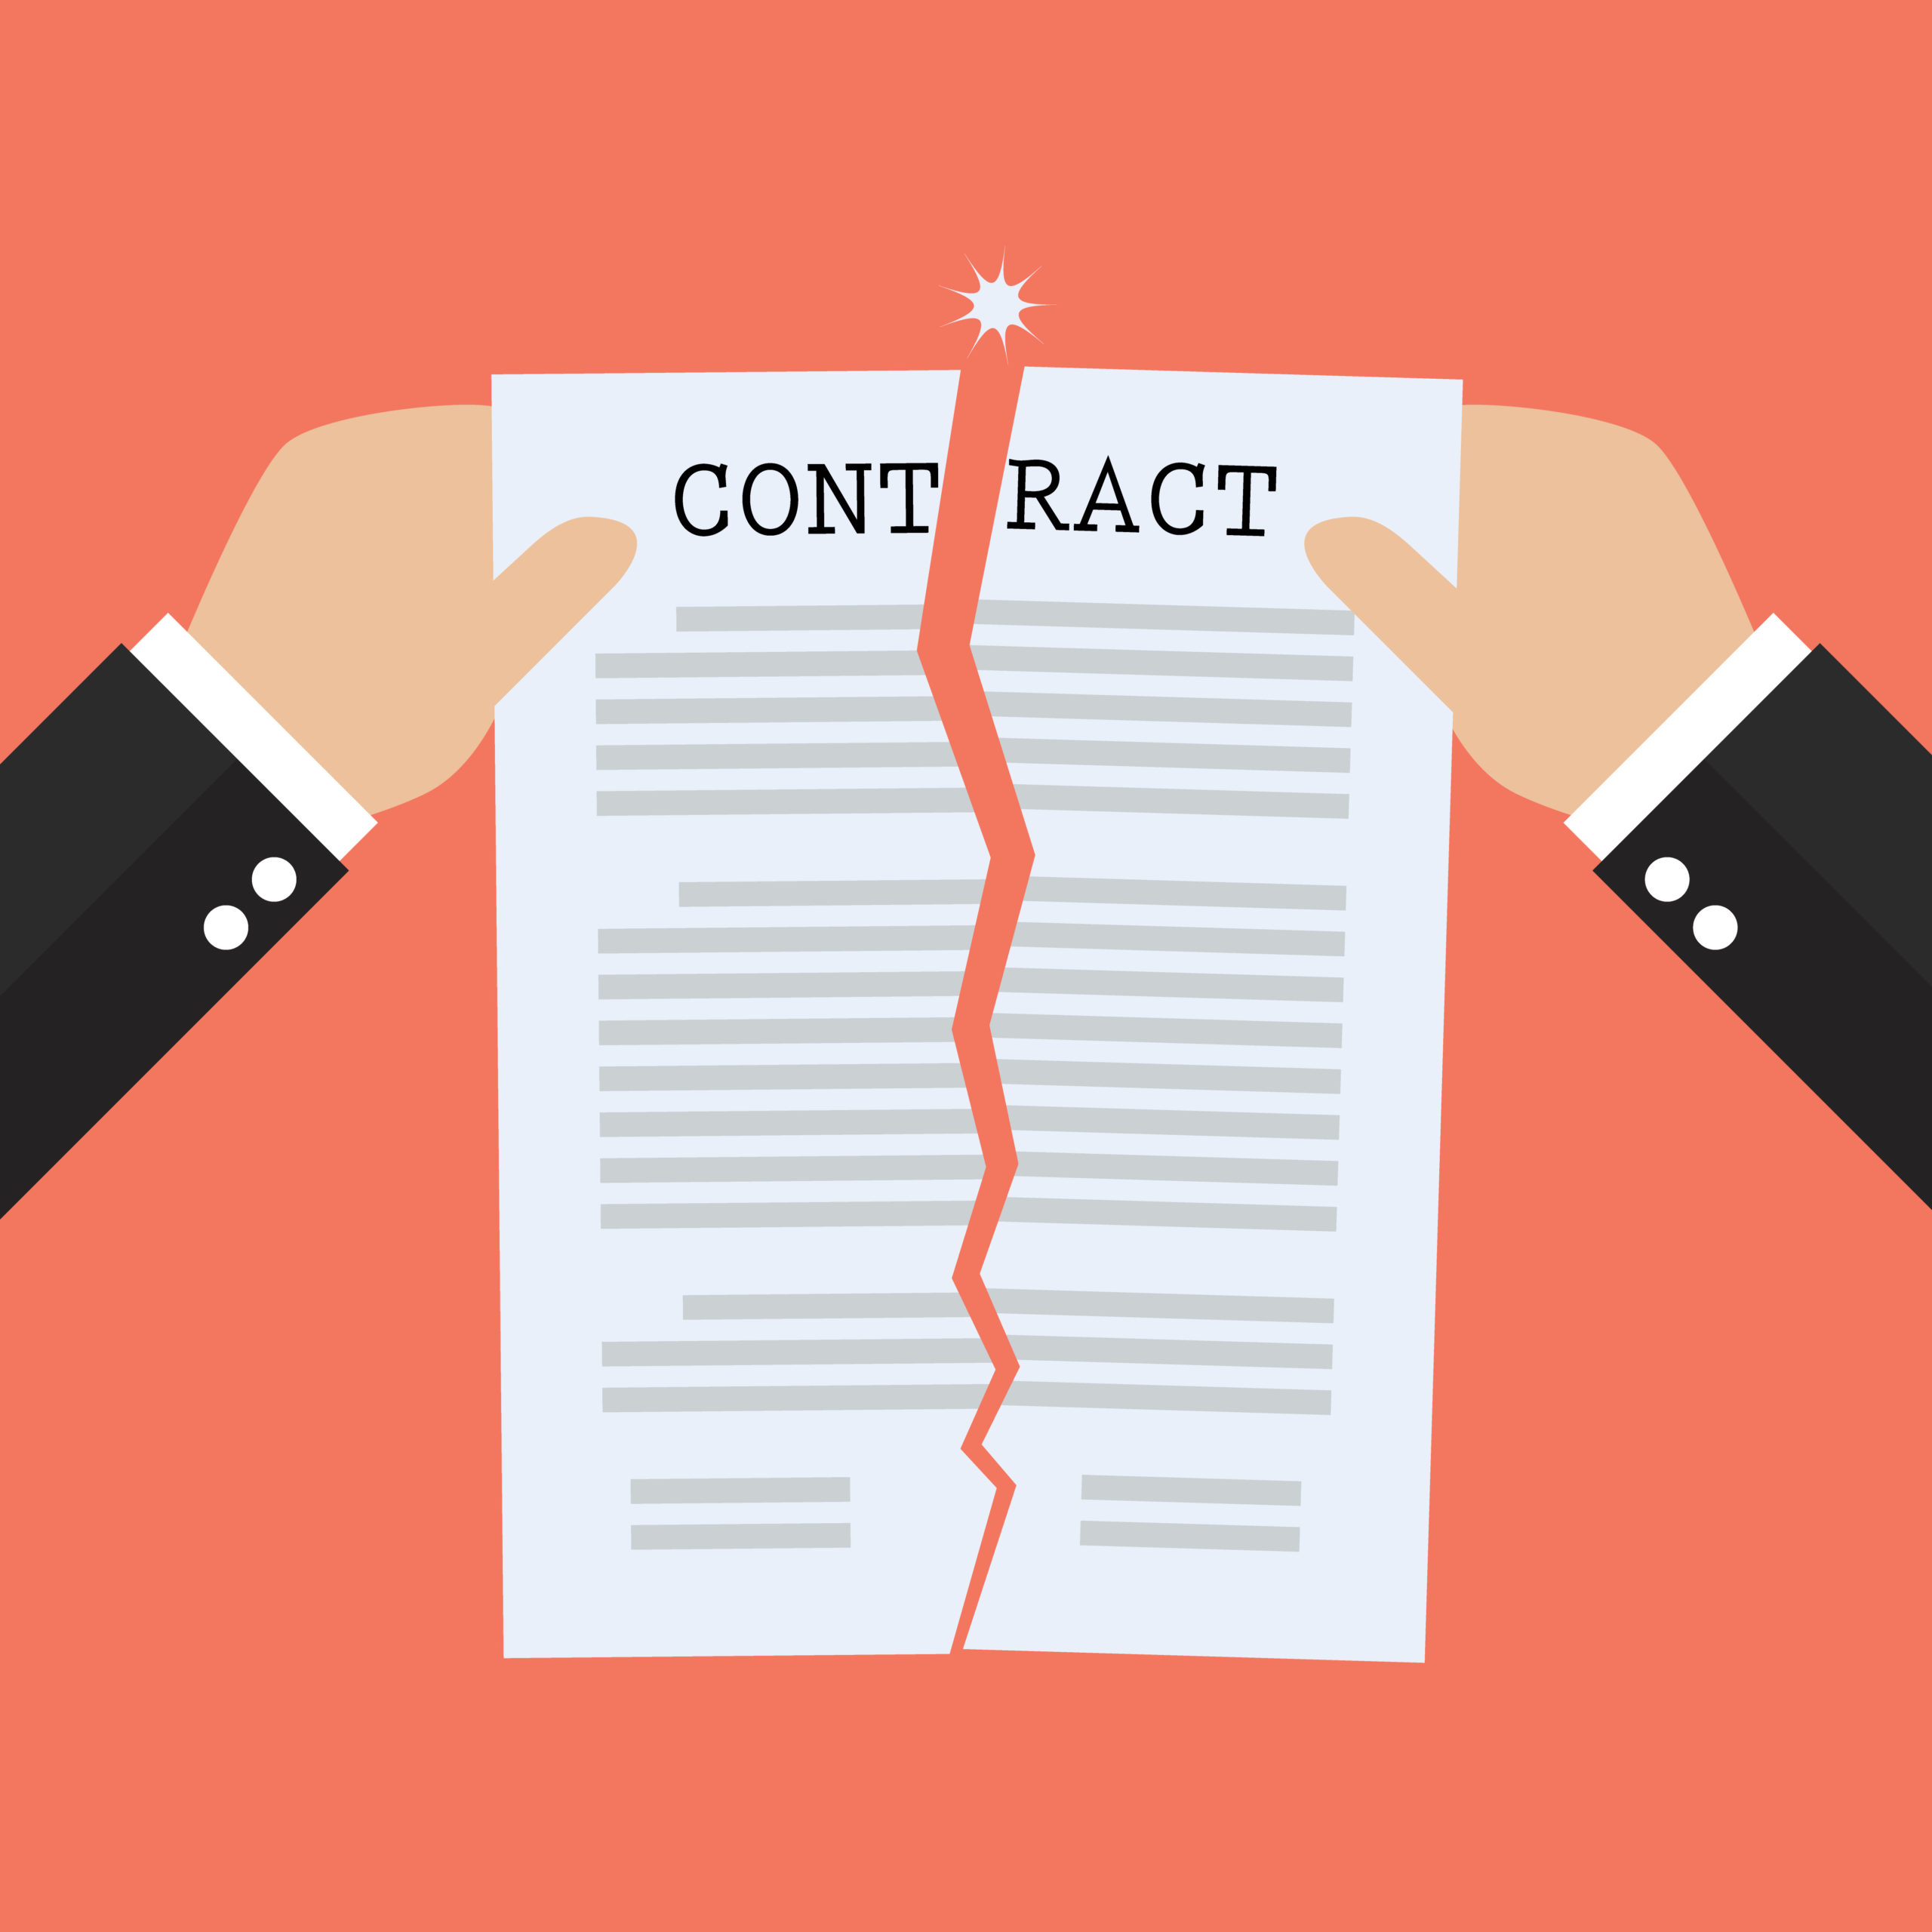 describe the remedies available for breach of contract